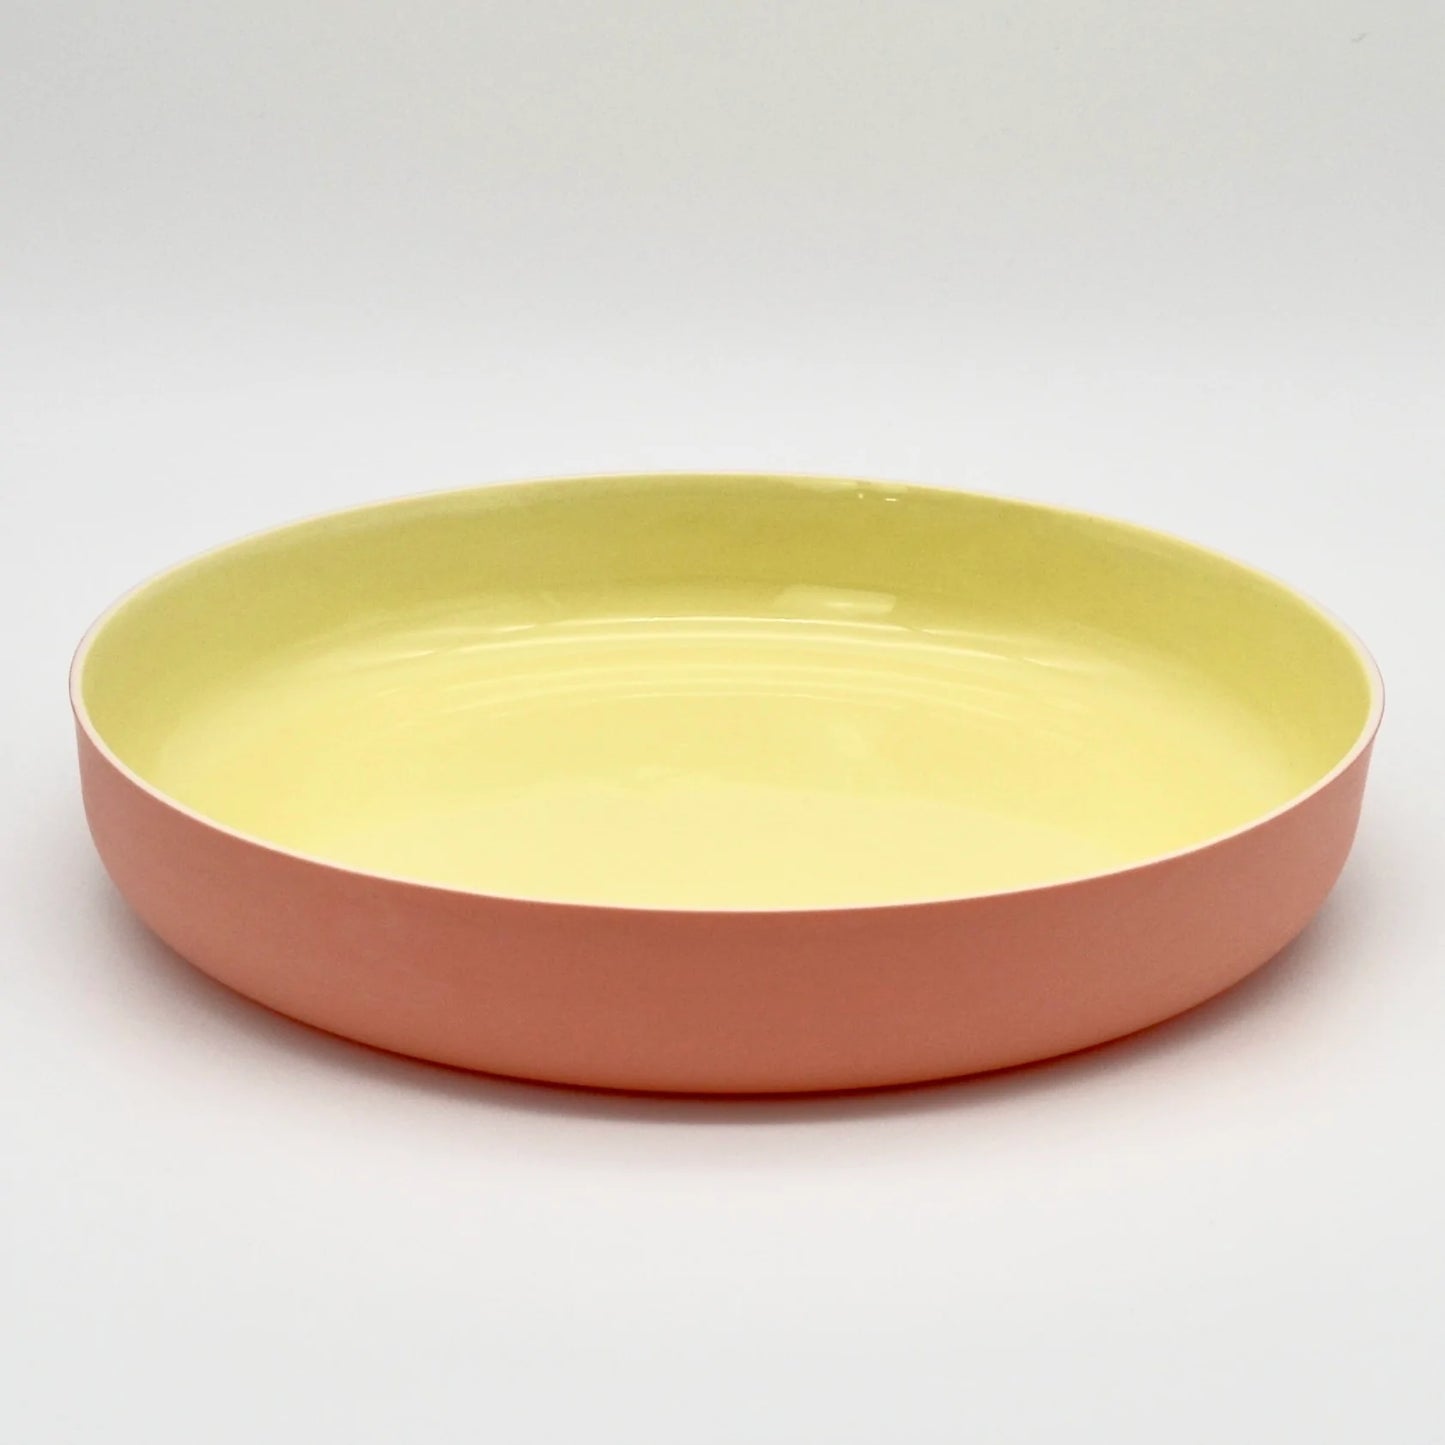 Serving Plate in Pink